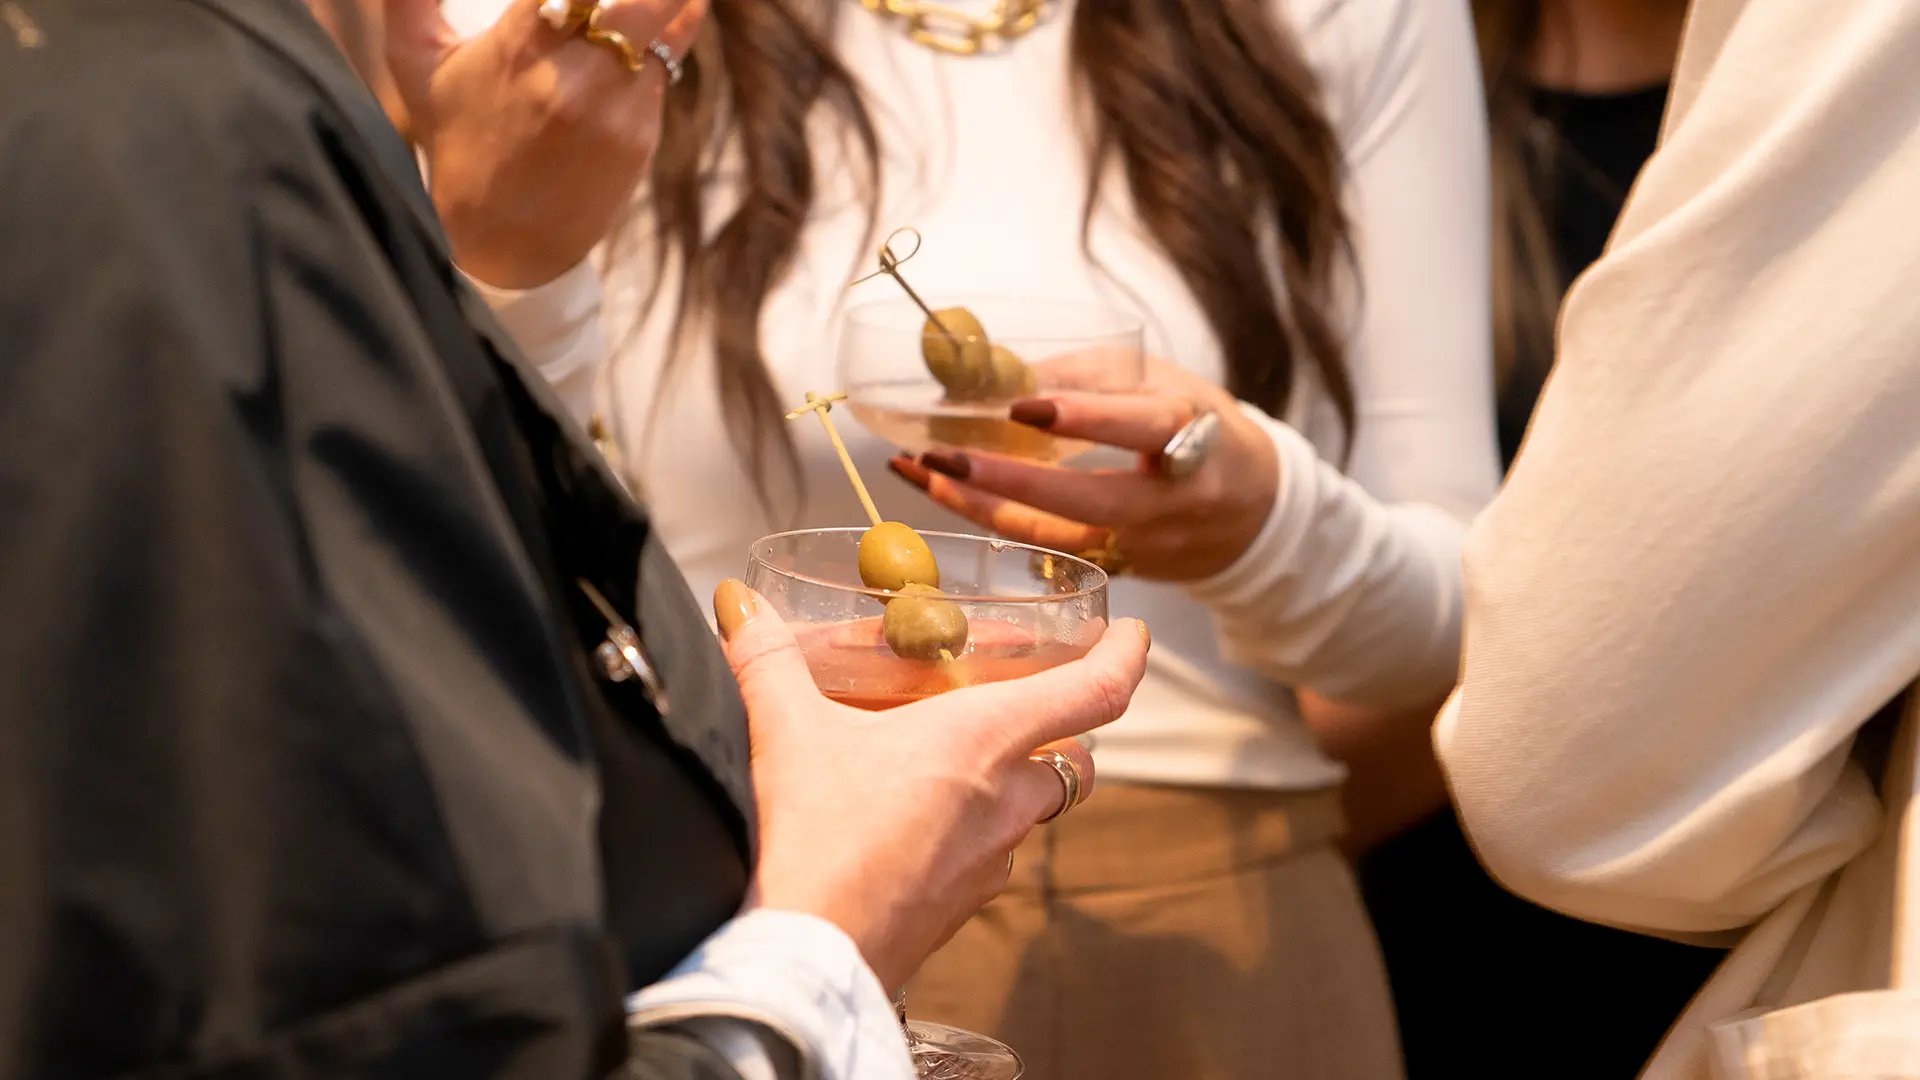 Drinking a cocktail at a function